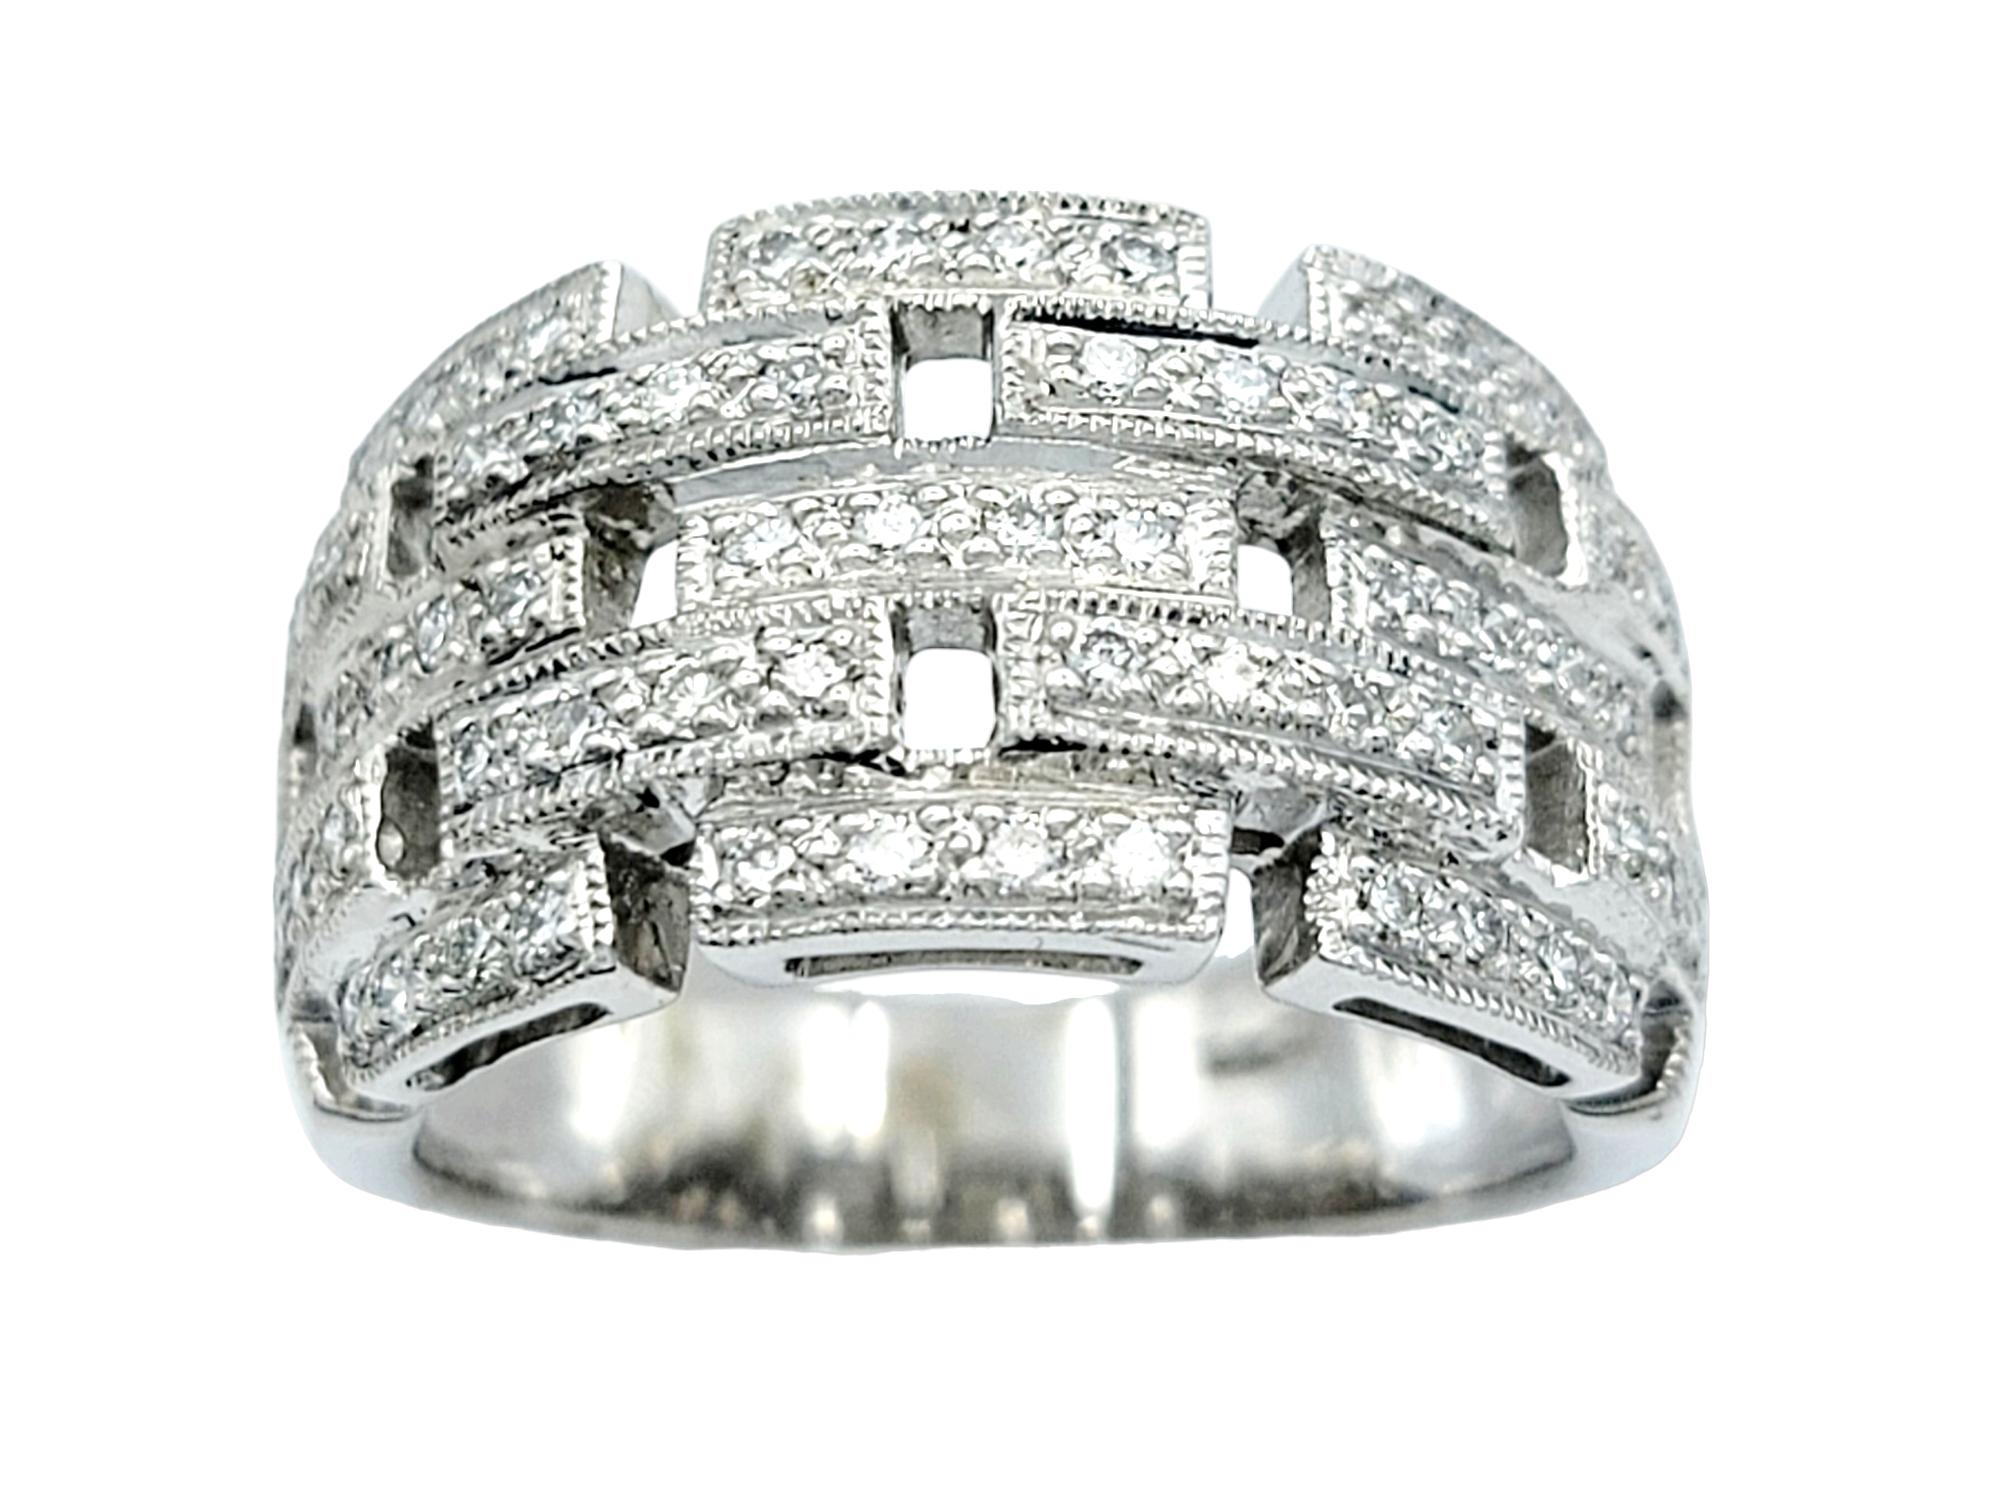 Ring Size: 6.5

Elegance meets contemporary design in this stunning diamond band ring, set in exquisite 18 karat white gold. The ring features a captivating panther link design, showcasing a pattern of sparkling stacked rectangles. The geometric